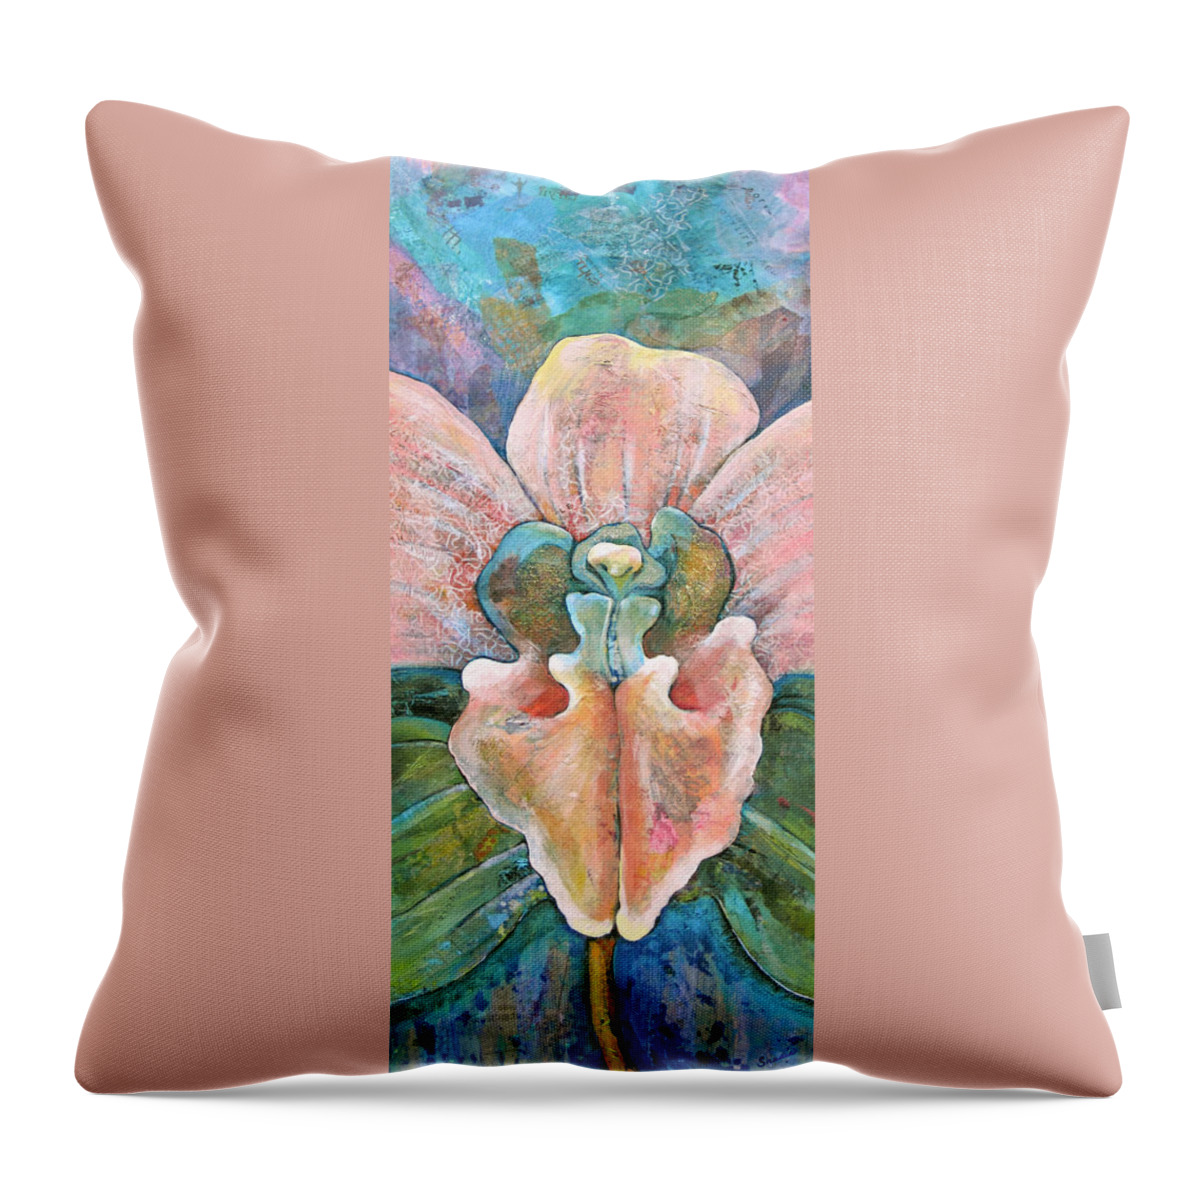 Orchid Throw Pillow featuring the painting Transcendence by Shadia Derbyshire